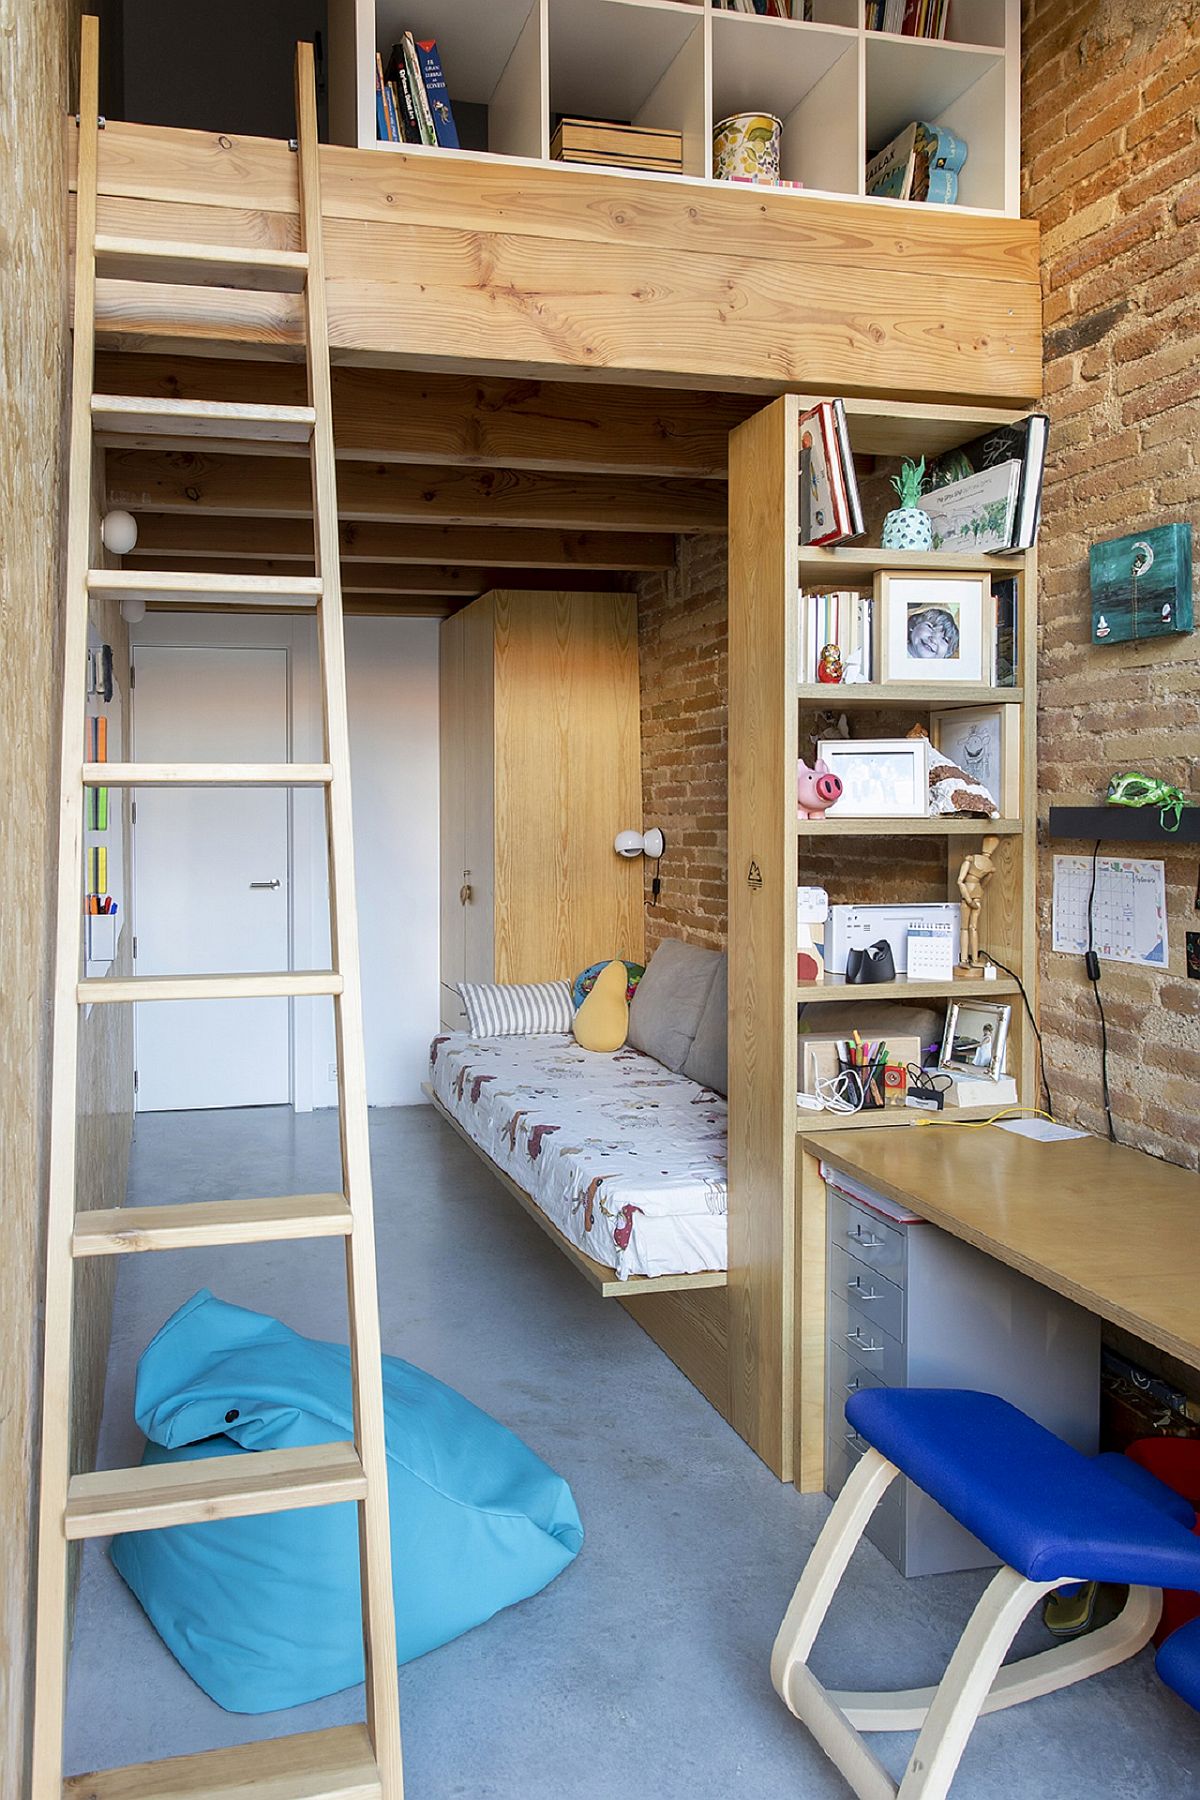 Tiny bedroom with loft level makes smart use of limited space